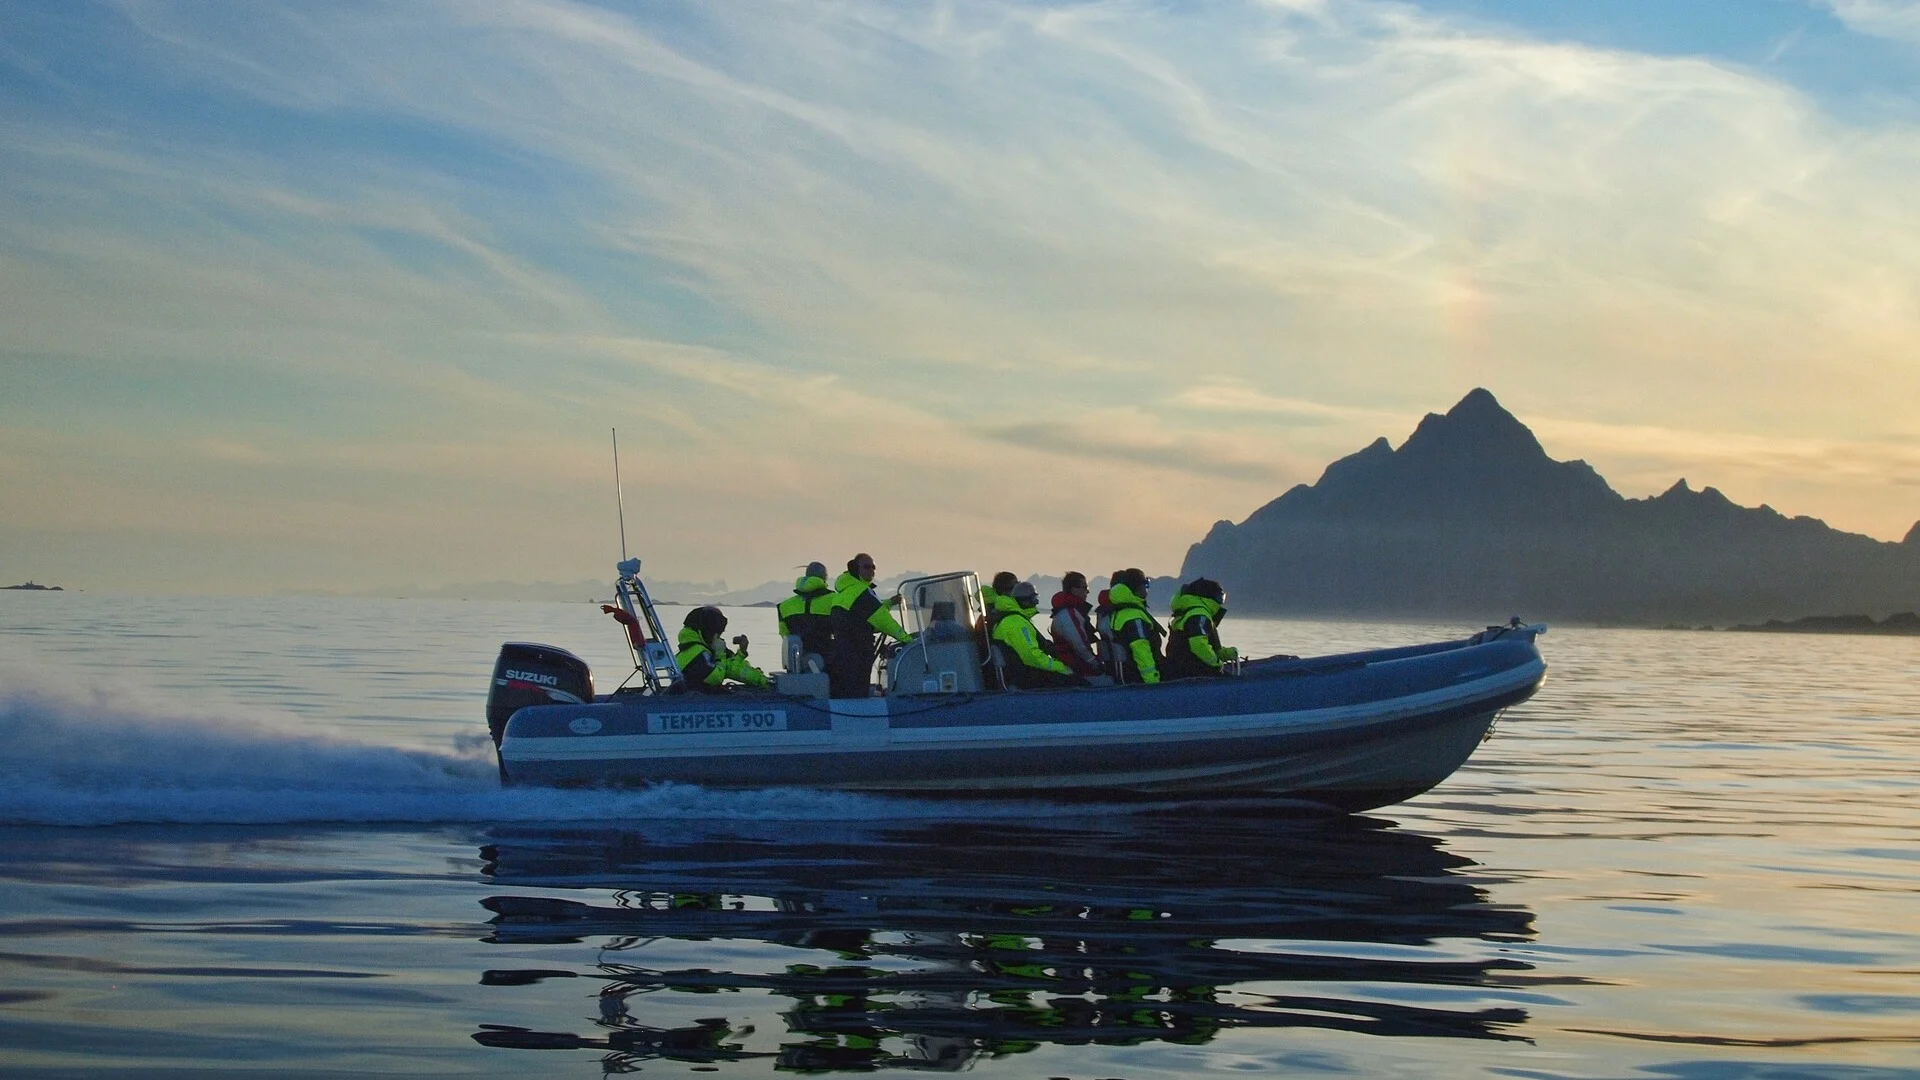 A group of tourists enjoy a RIB experience in the Lofoten Islands